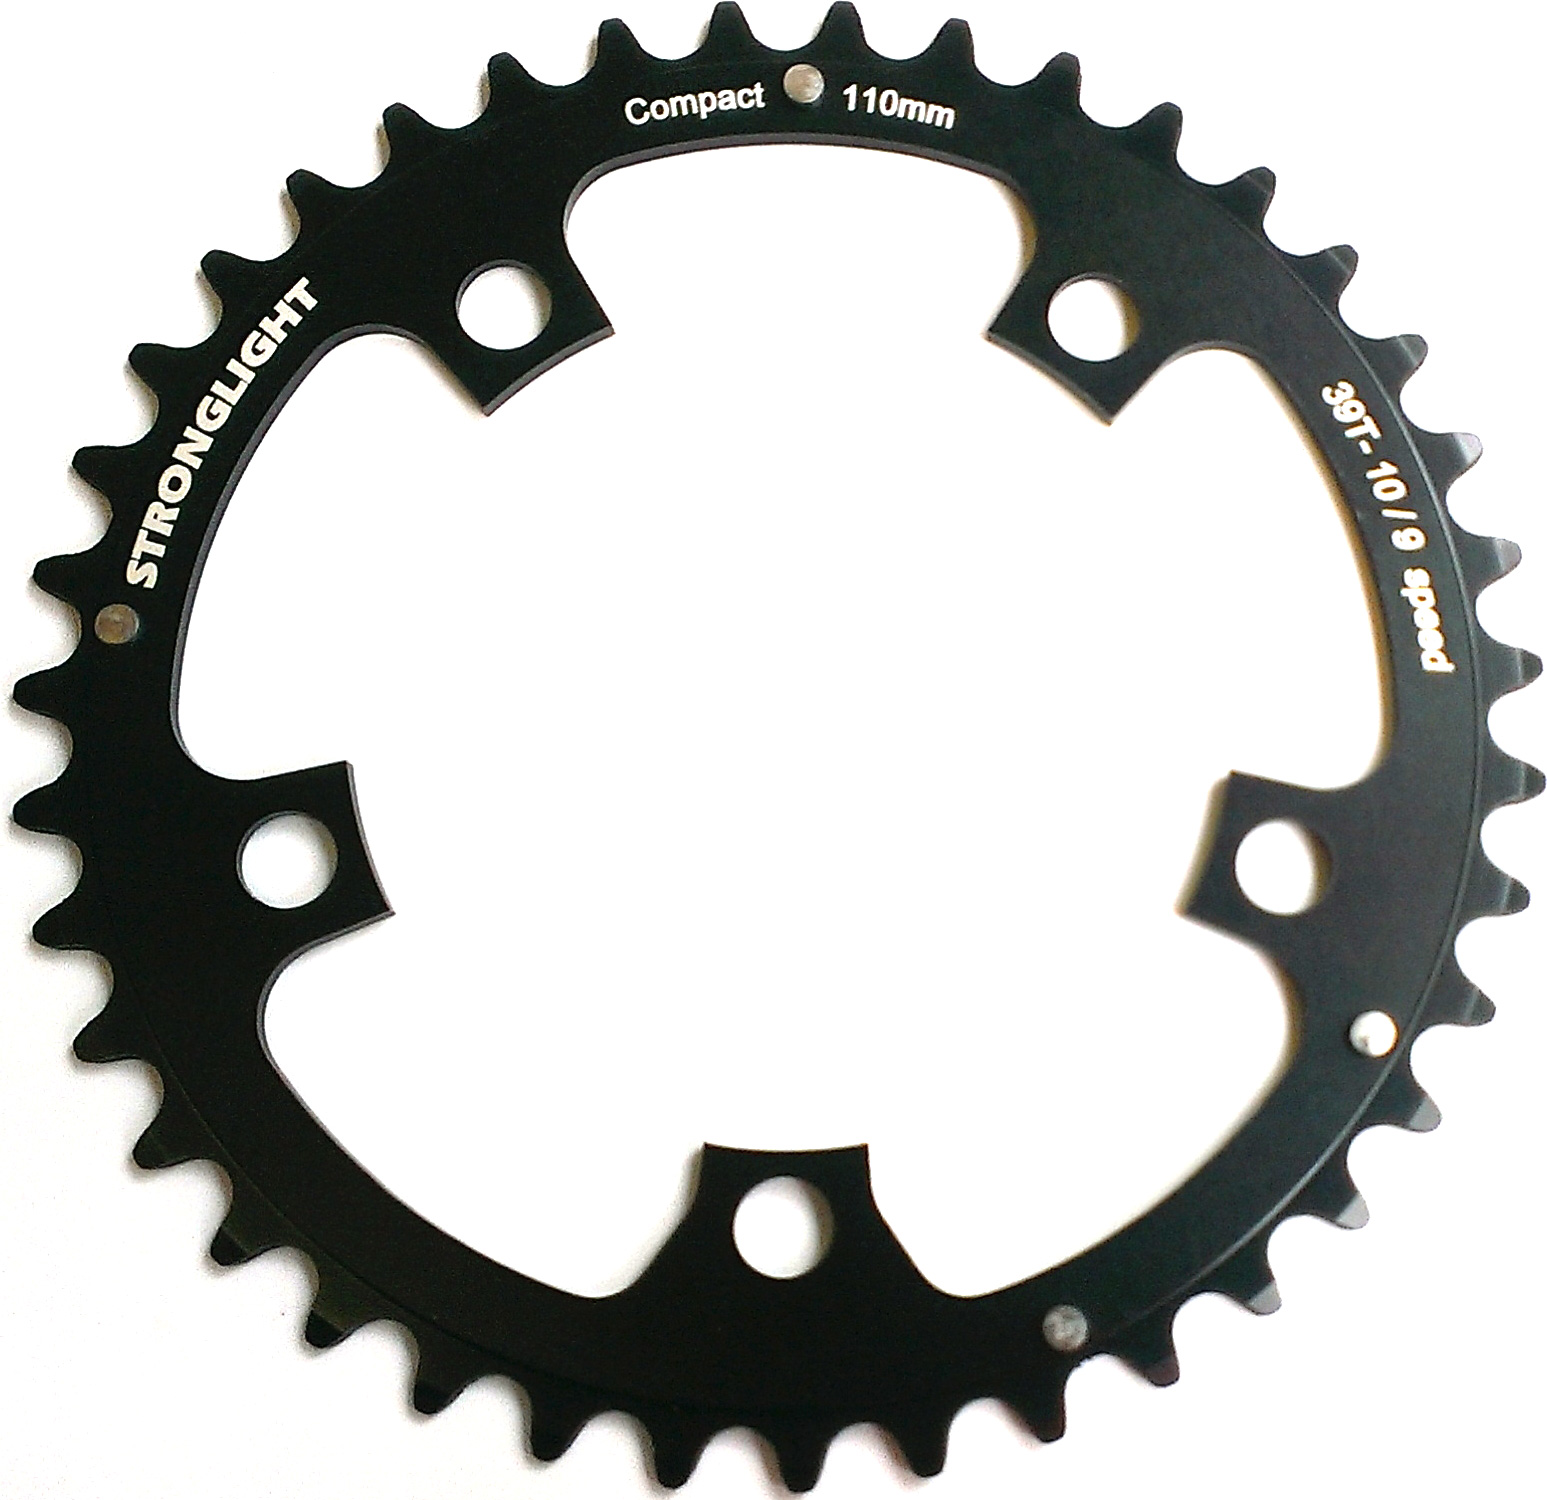 RD11036Z Stronglight 36T Black 5-Arm/110mm Chainring